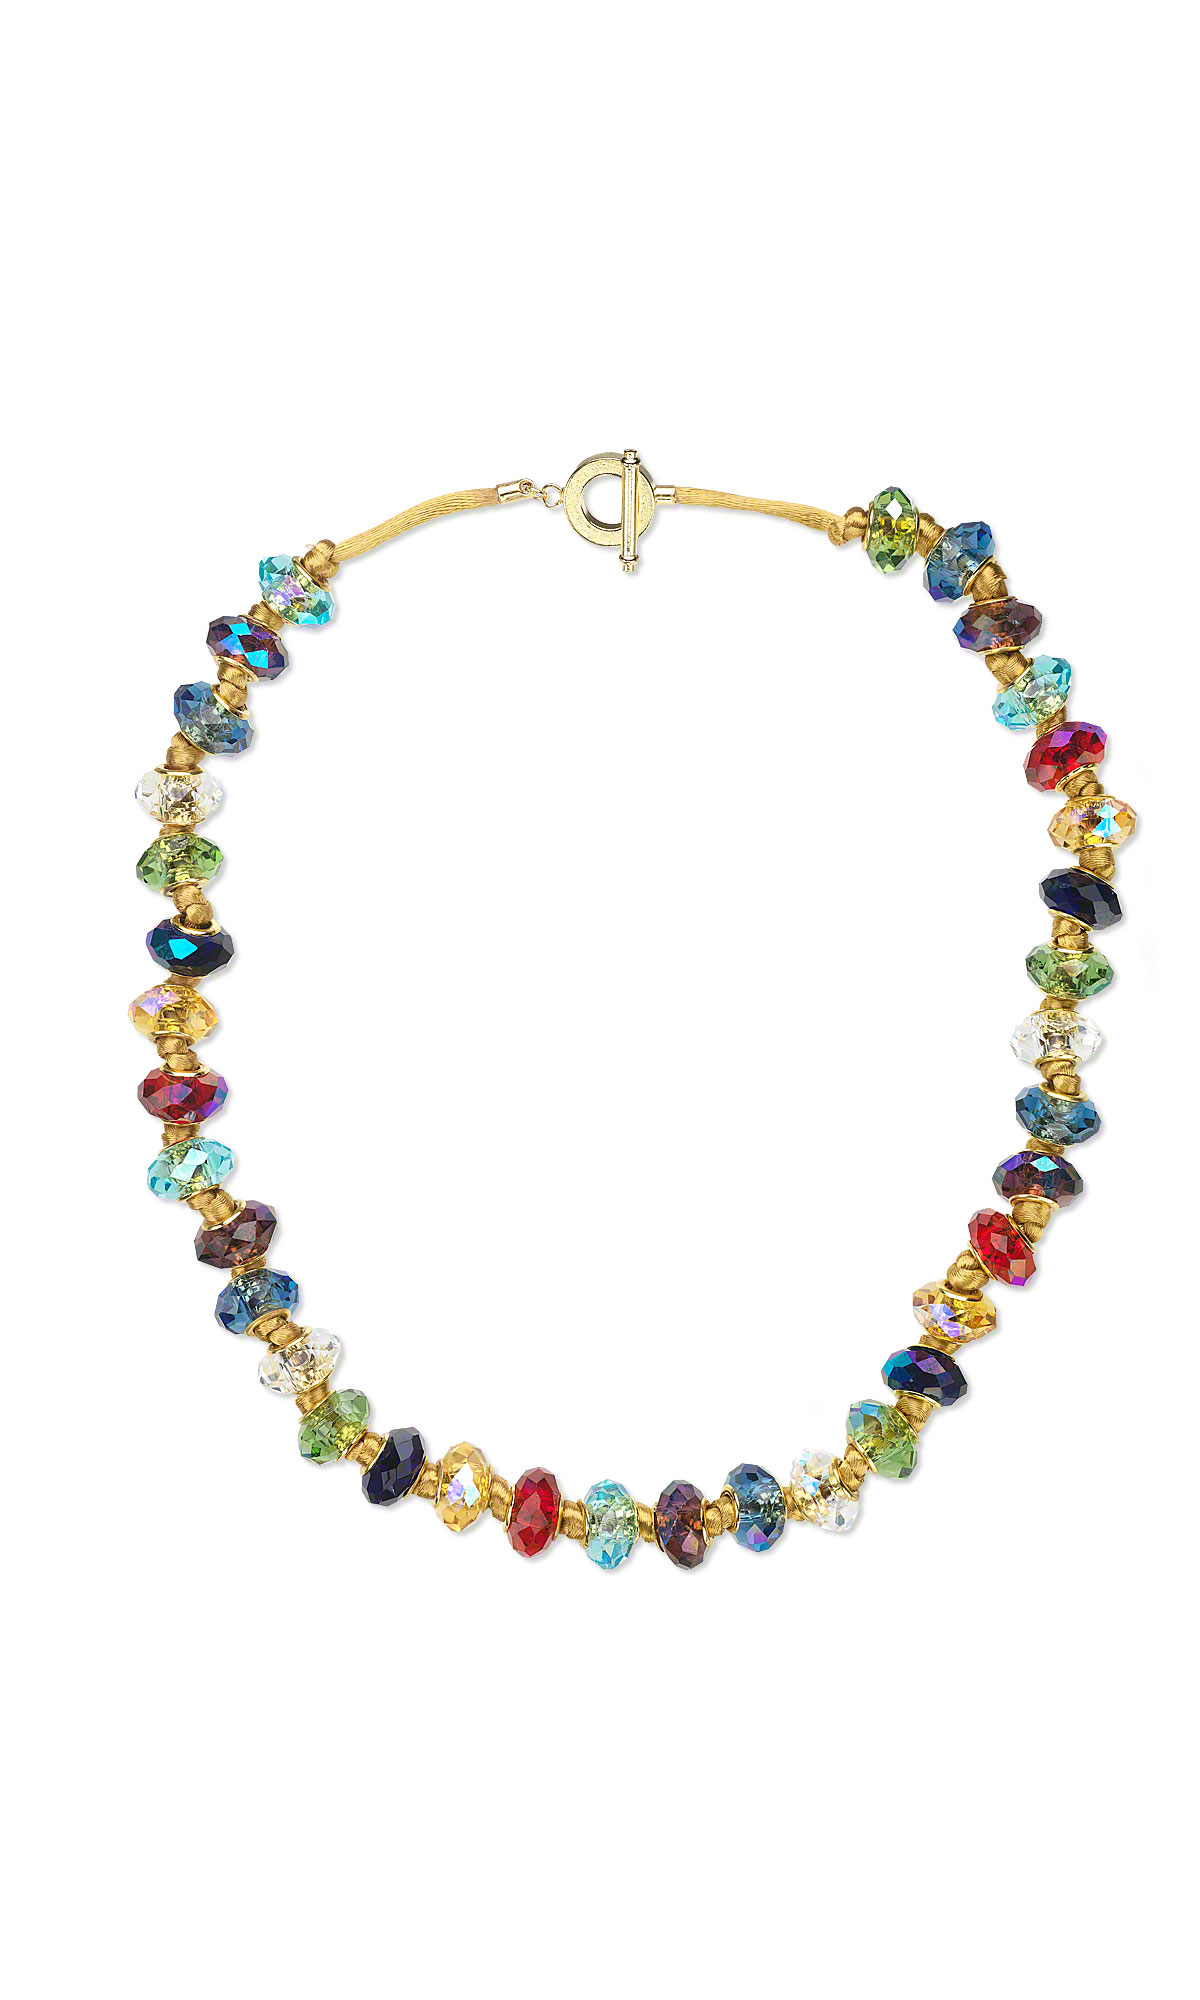 Jewelry Design - Single-Strand Necklace with Dione® Glass Beads and ...